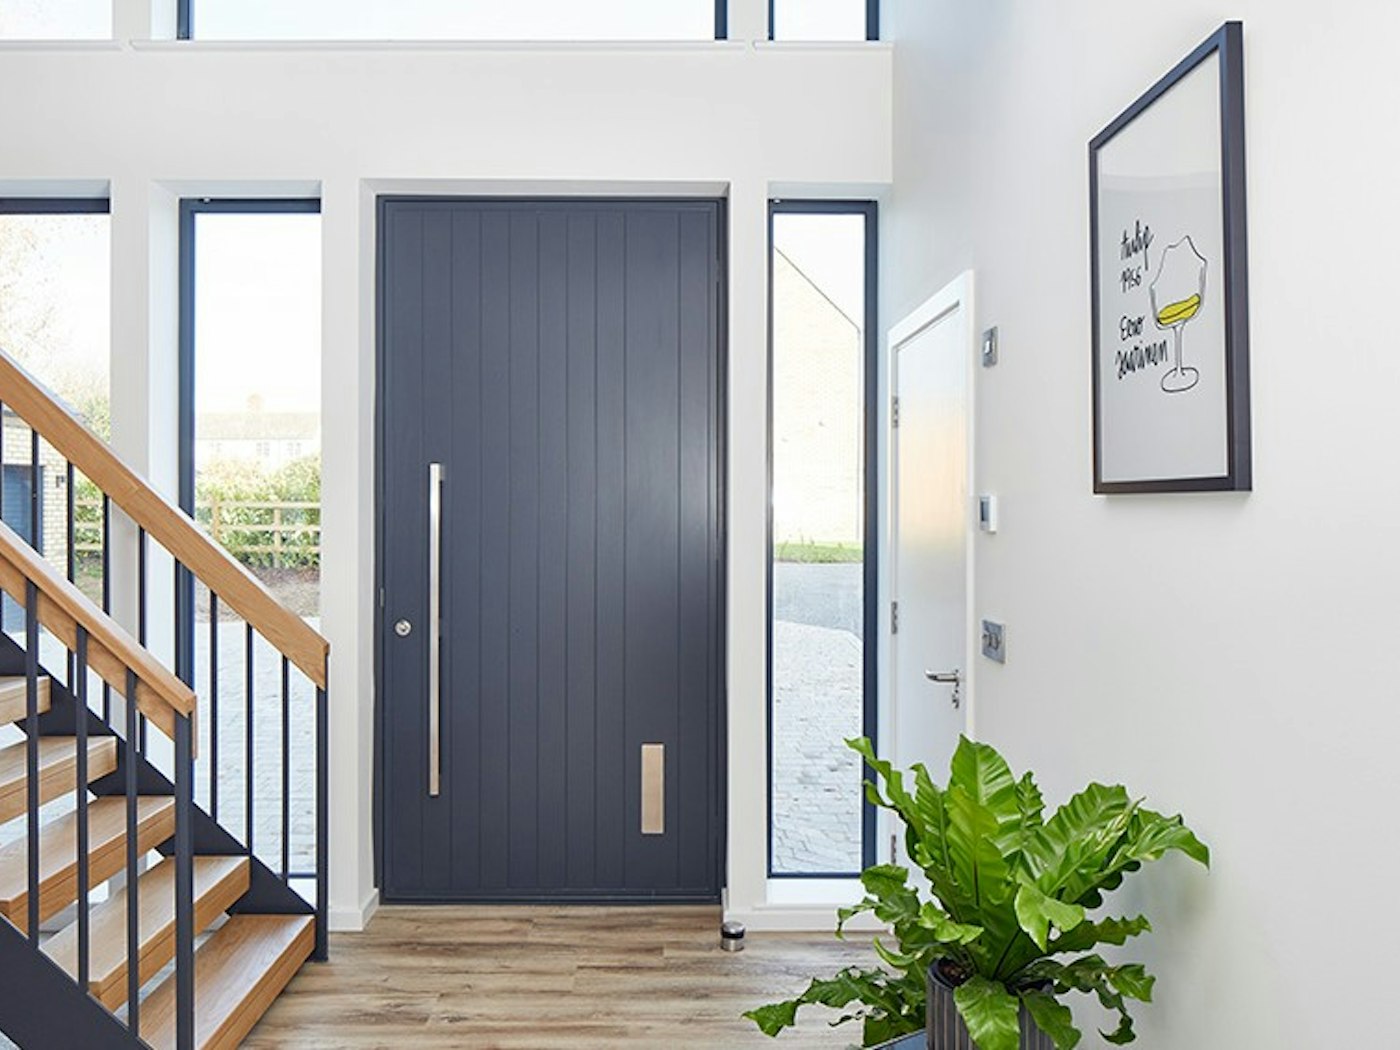 A picture-perfect anthracite grey front door with a contrasting light interior